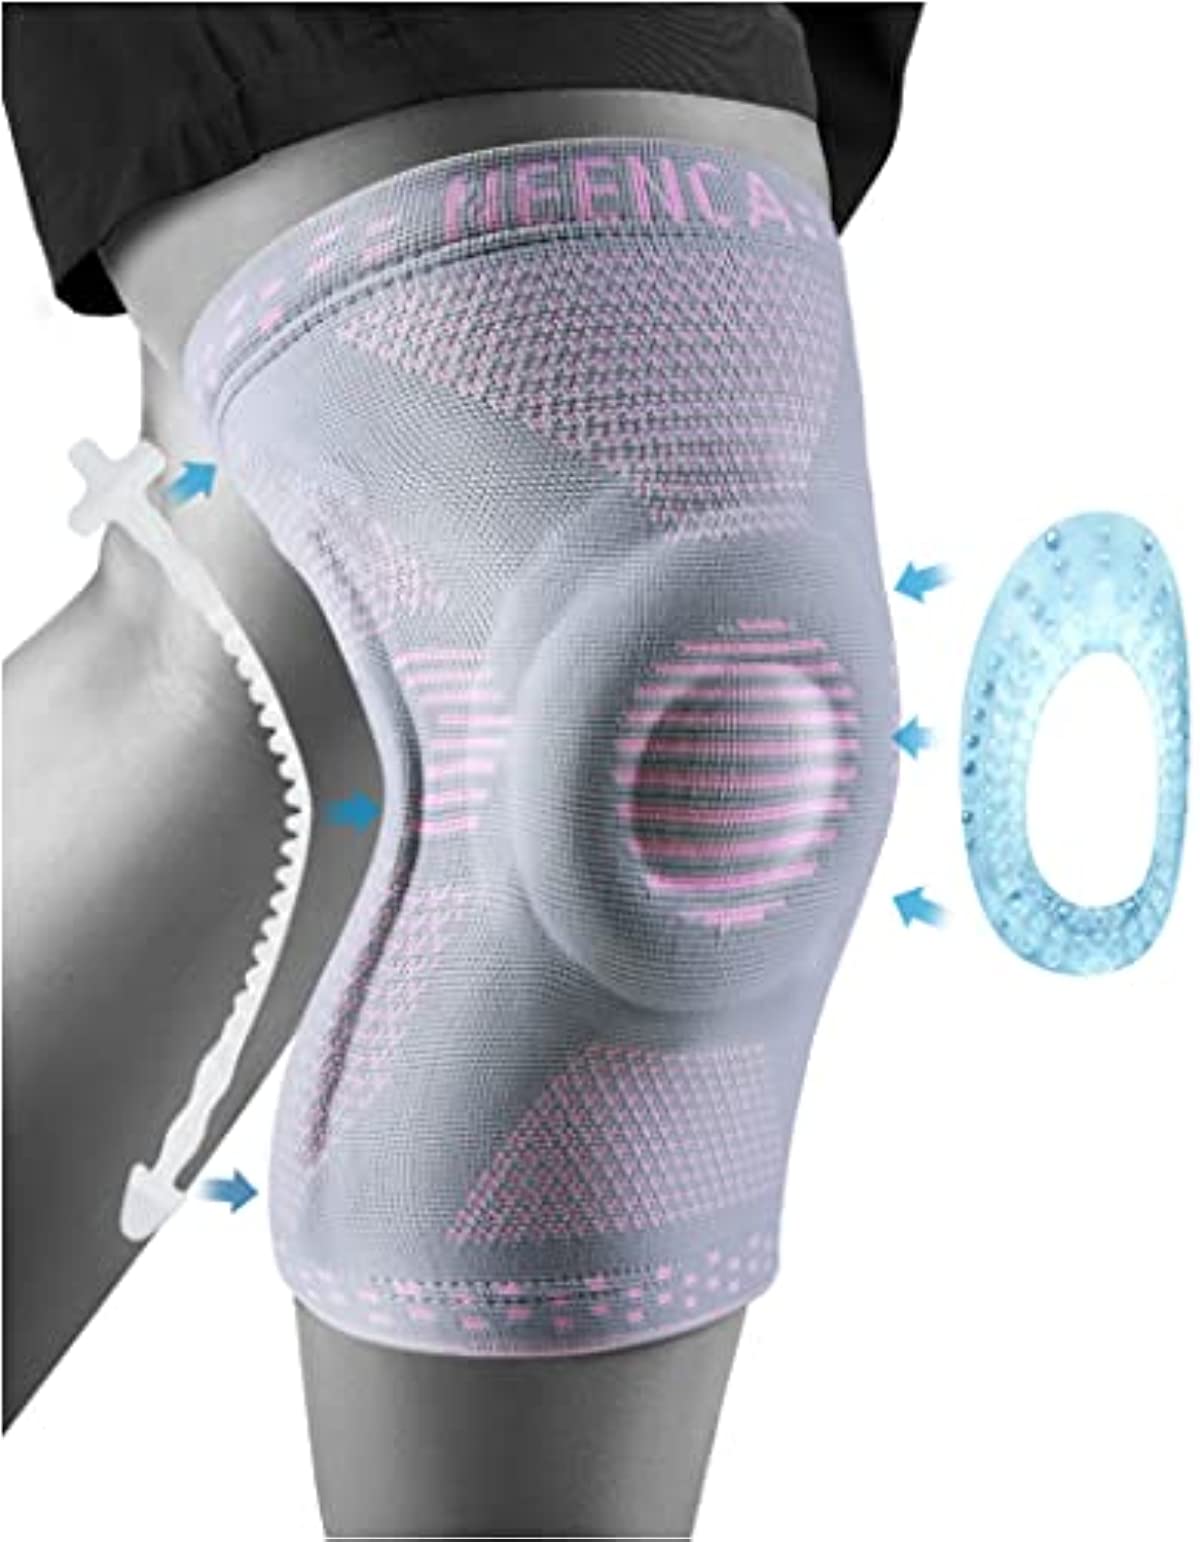 NEENCA Professional Plus Size Knee Brace, Knee Compression Sleeve for Larger Legs and Bigger Thighs, Medical Knee Support for Knee Pain Relief, Injury Recovery, Sports Protection, Single(2XL-5XL) (Pink Gray, 3XL)